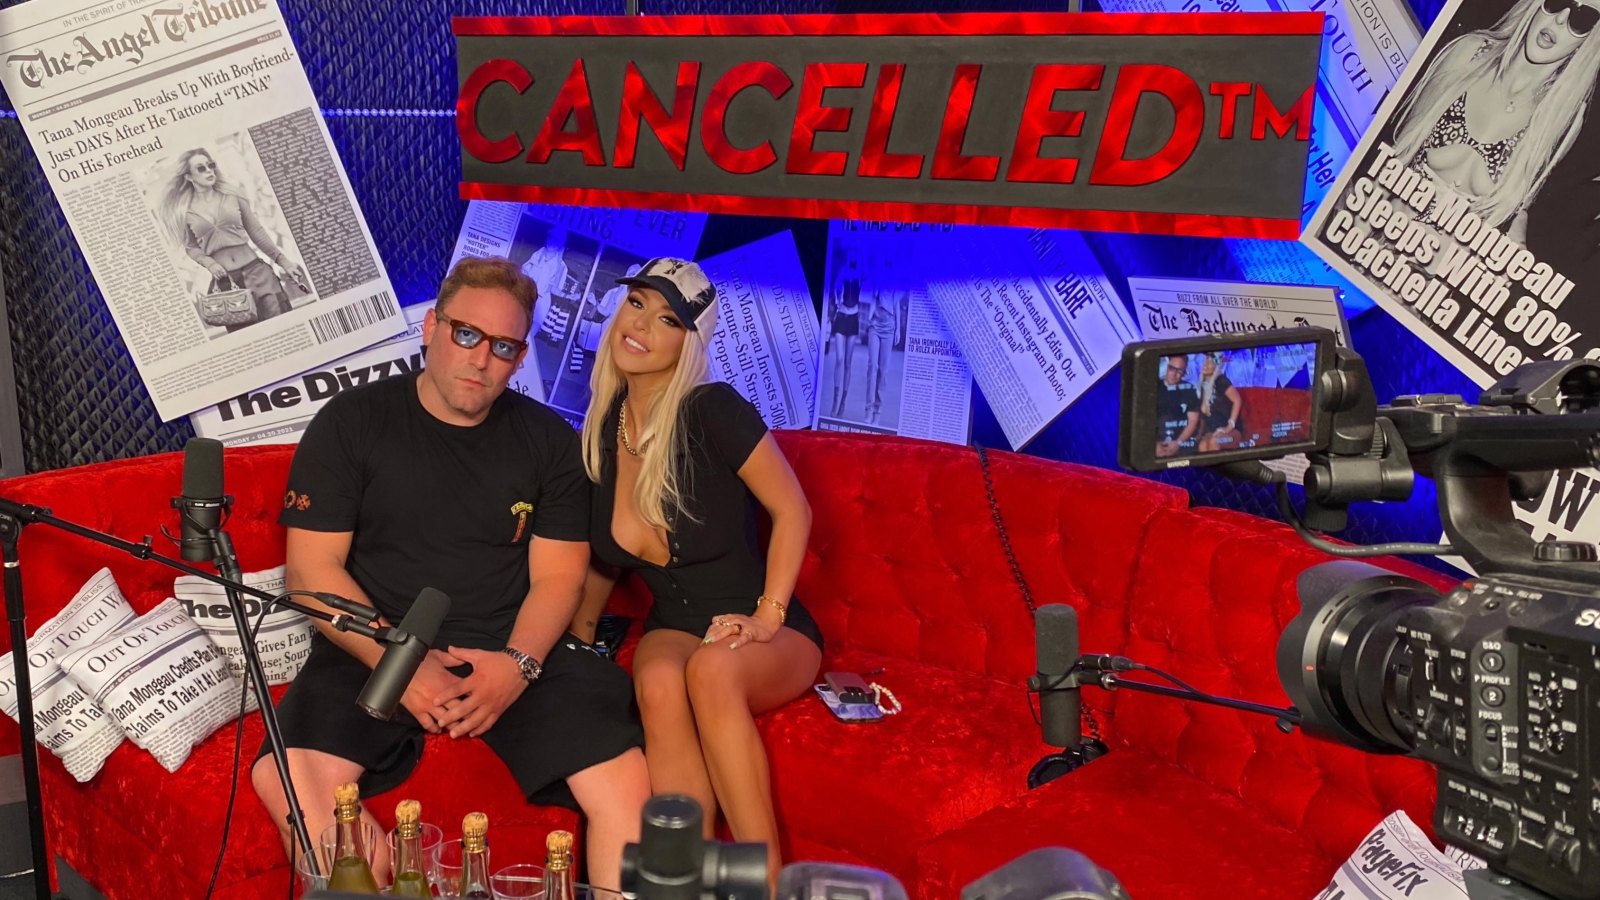 Social Media Star Tana Mongeau's Expolosive 'Cancelled' Podcast Goes No. 1 for the 2nd Week in a Row